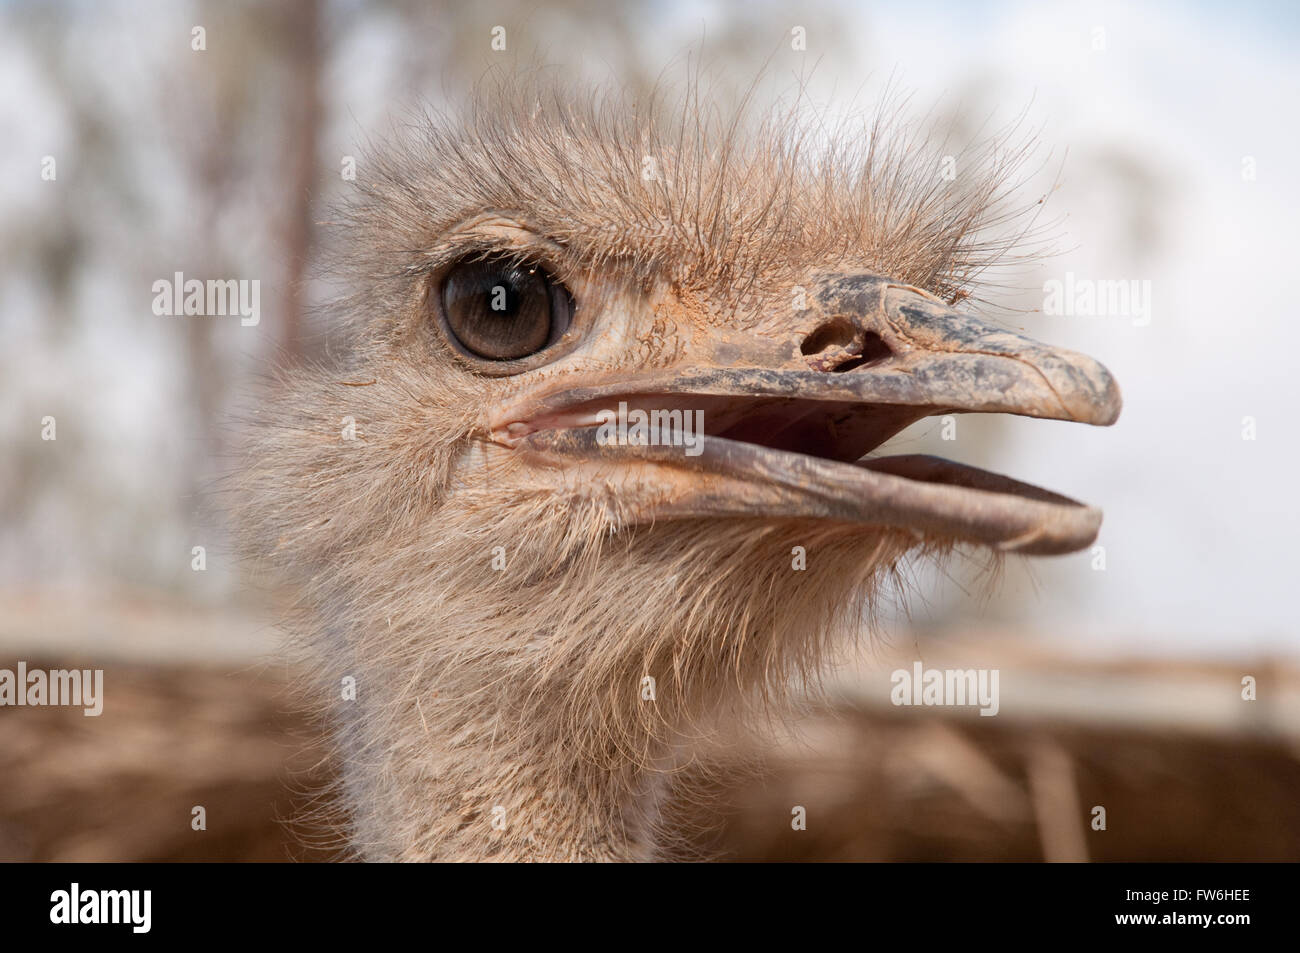 Close up of the face and beak of a Somali ostrich at the Shaumari Wildlife Reserve near Azraq, Jordan, Middle East. Stock Photo